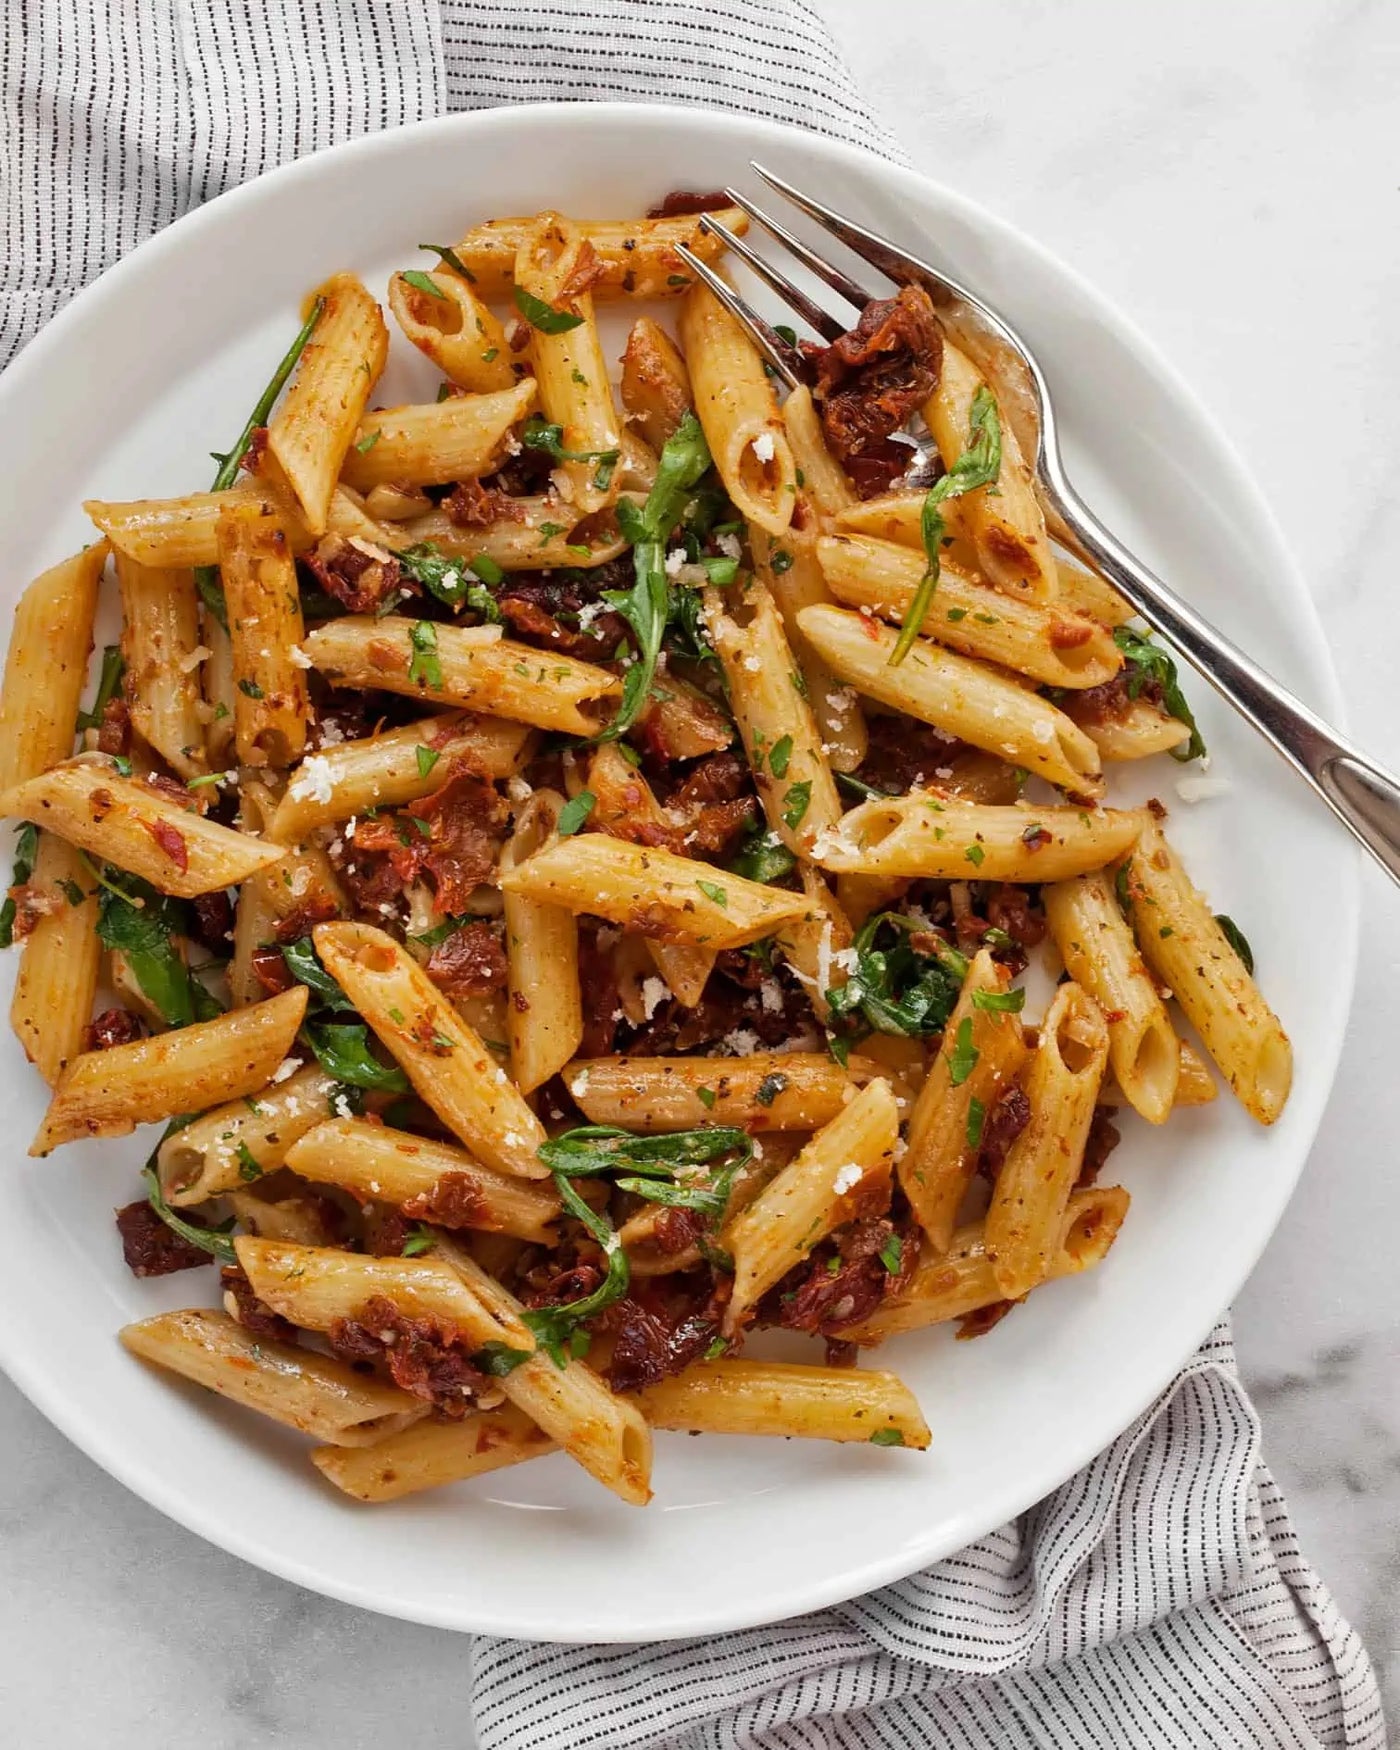 Chicken and Sun-Dried Tomatoes over Pasta